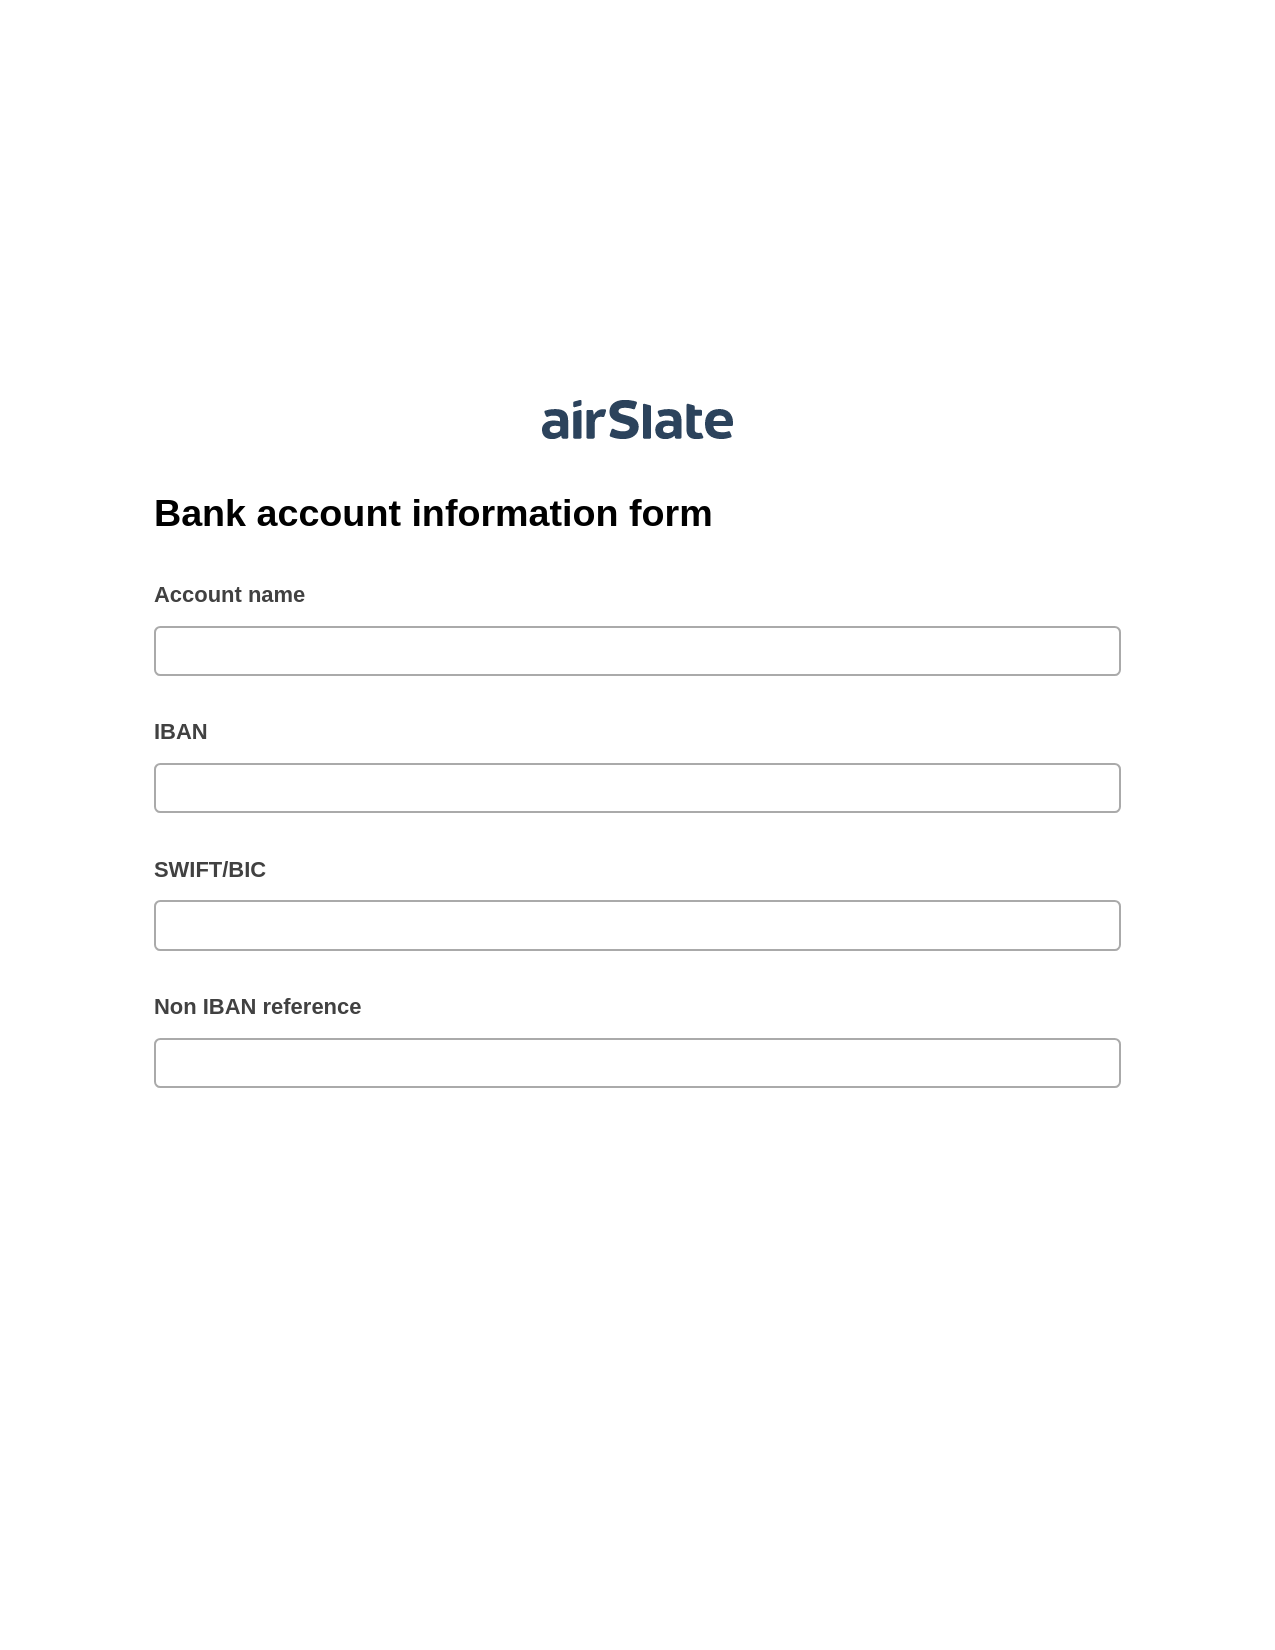 Multirole Bank account information form Pre-fill Dropdown from Airtable, Mailchimp add recipient to audience Bot, Archive to SharePoint Folder Bot